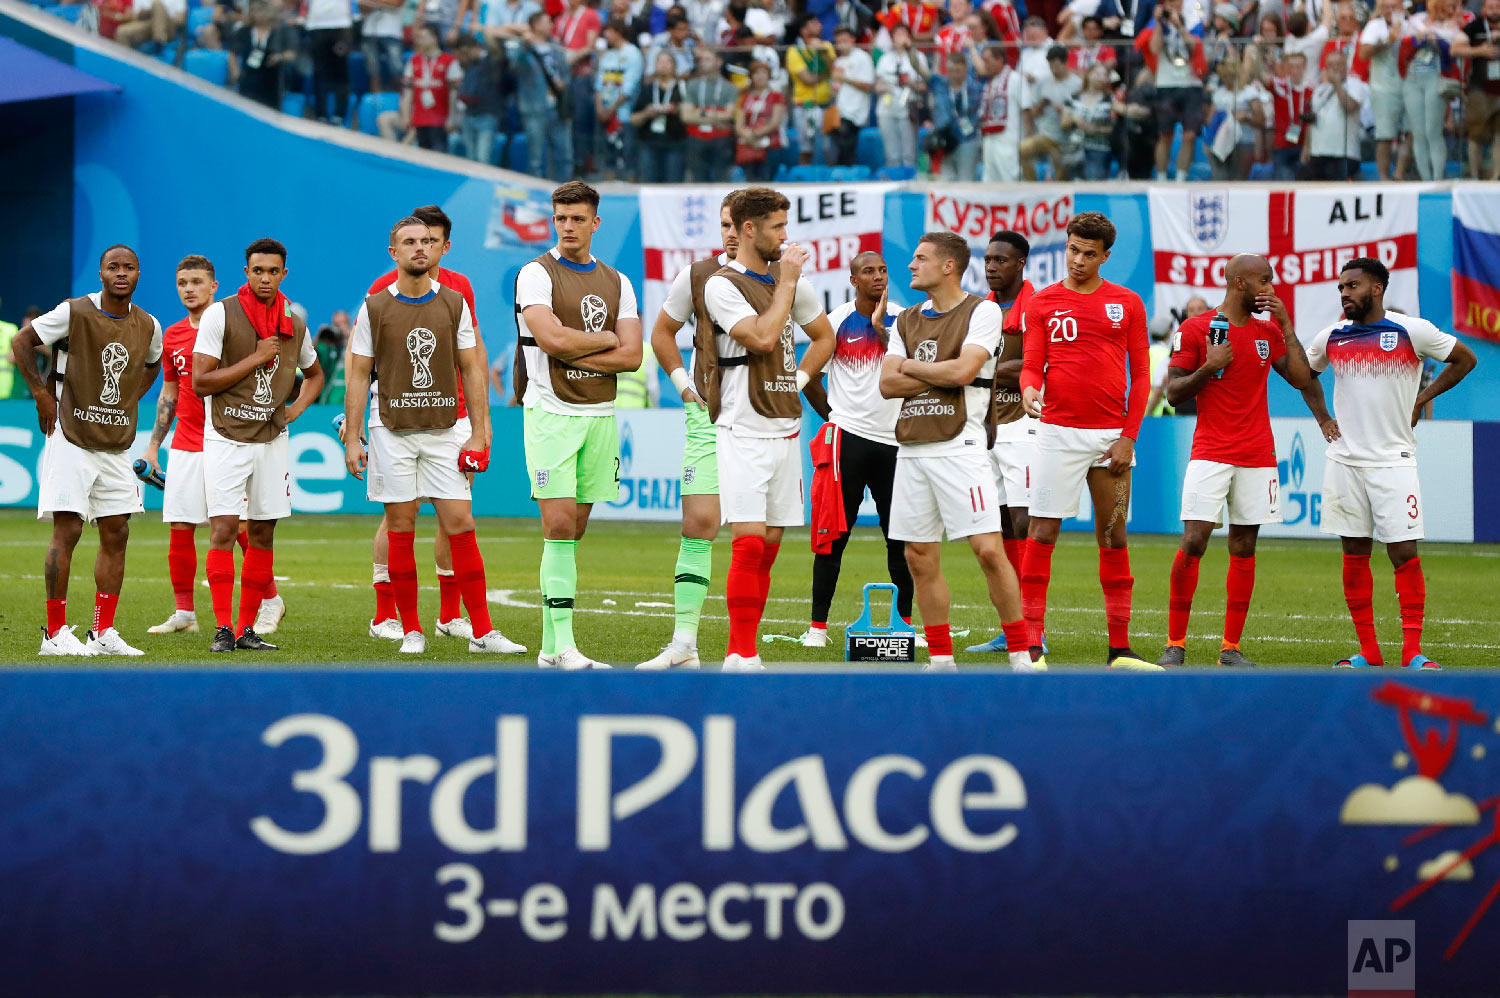  England players look on as Belgium is recognized as the third place winner after defeating England in the third place match at the 2018 soccer World Cup in the St. Petersburg Stadium in St. Petersburg, Russia, Saturday, July 14, 2018. (AP Photo/Petr